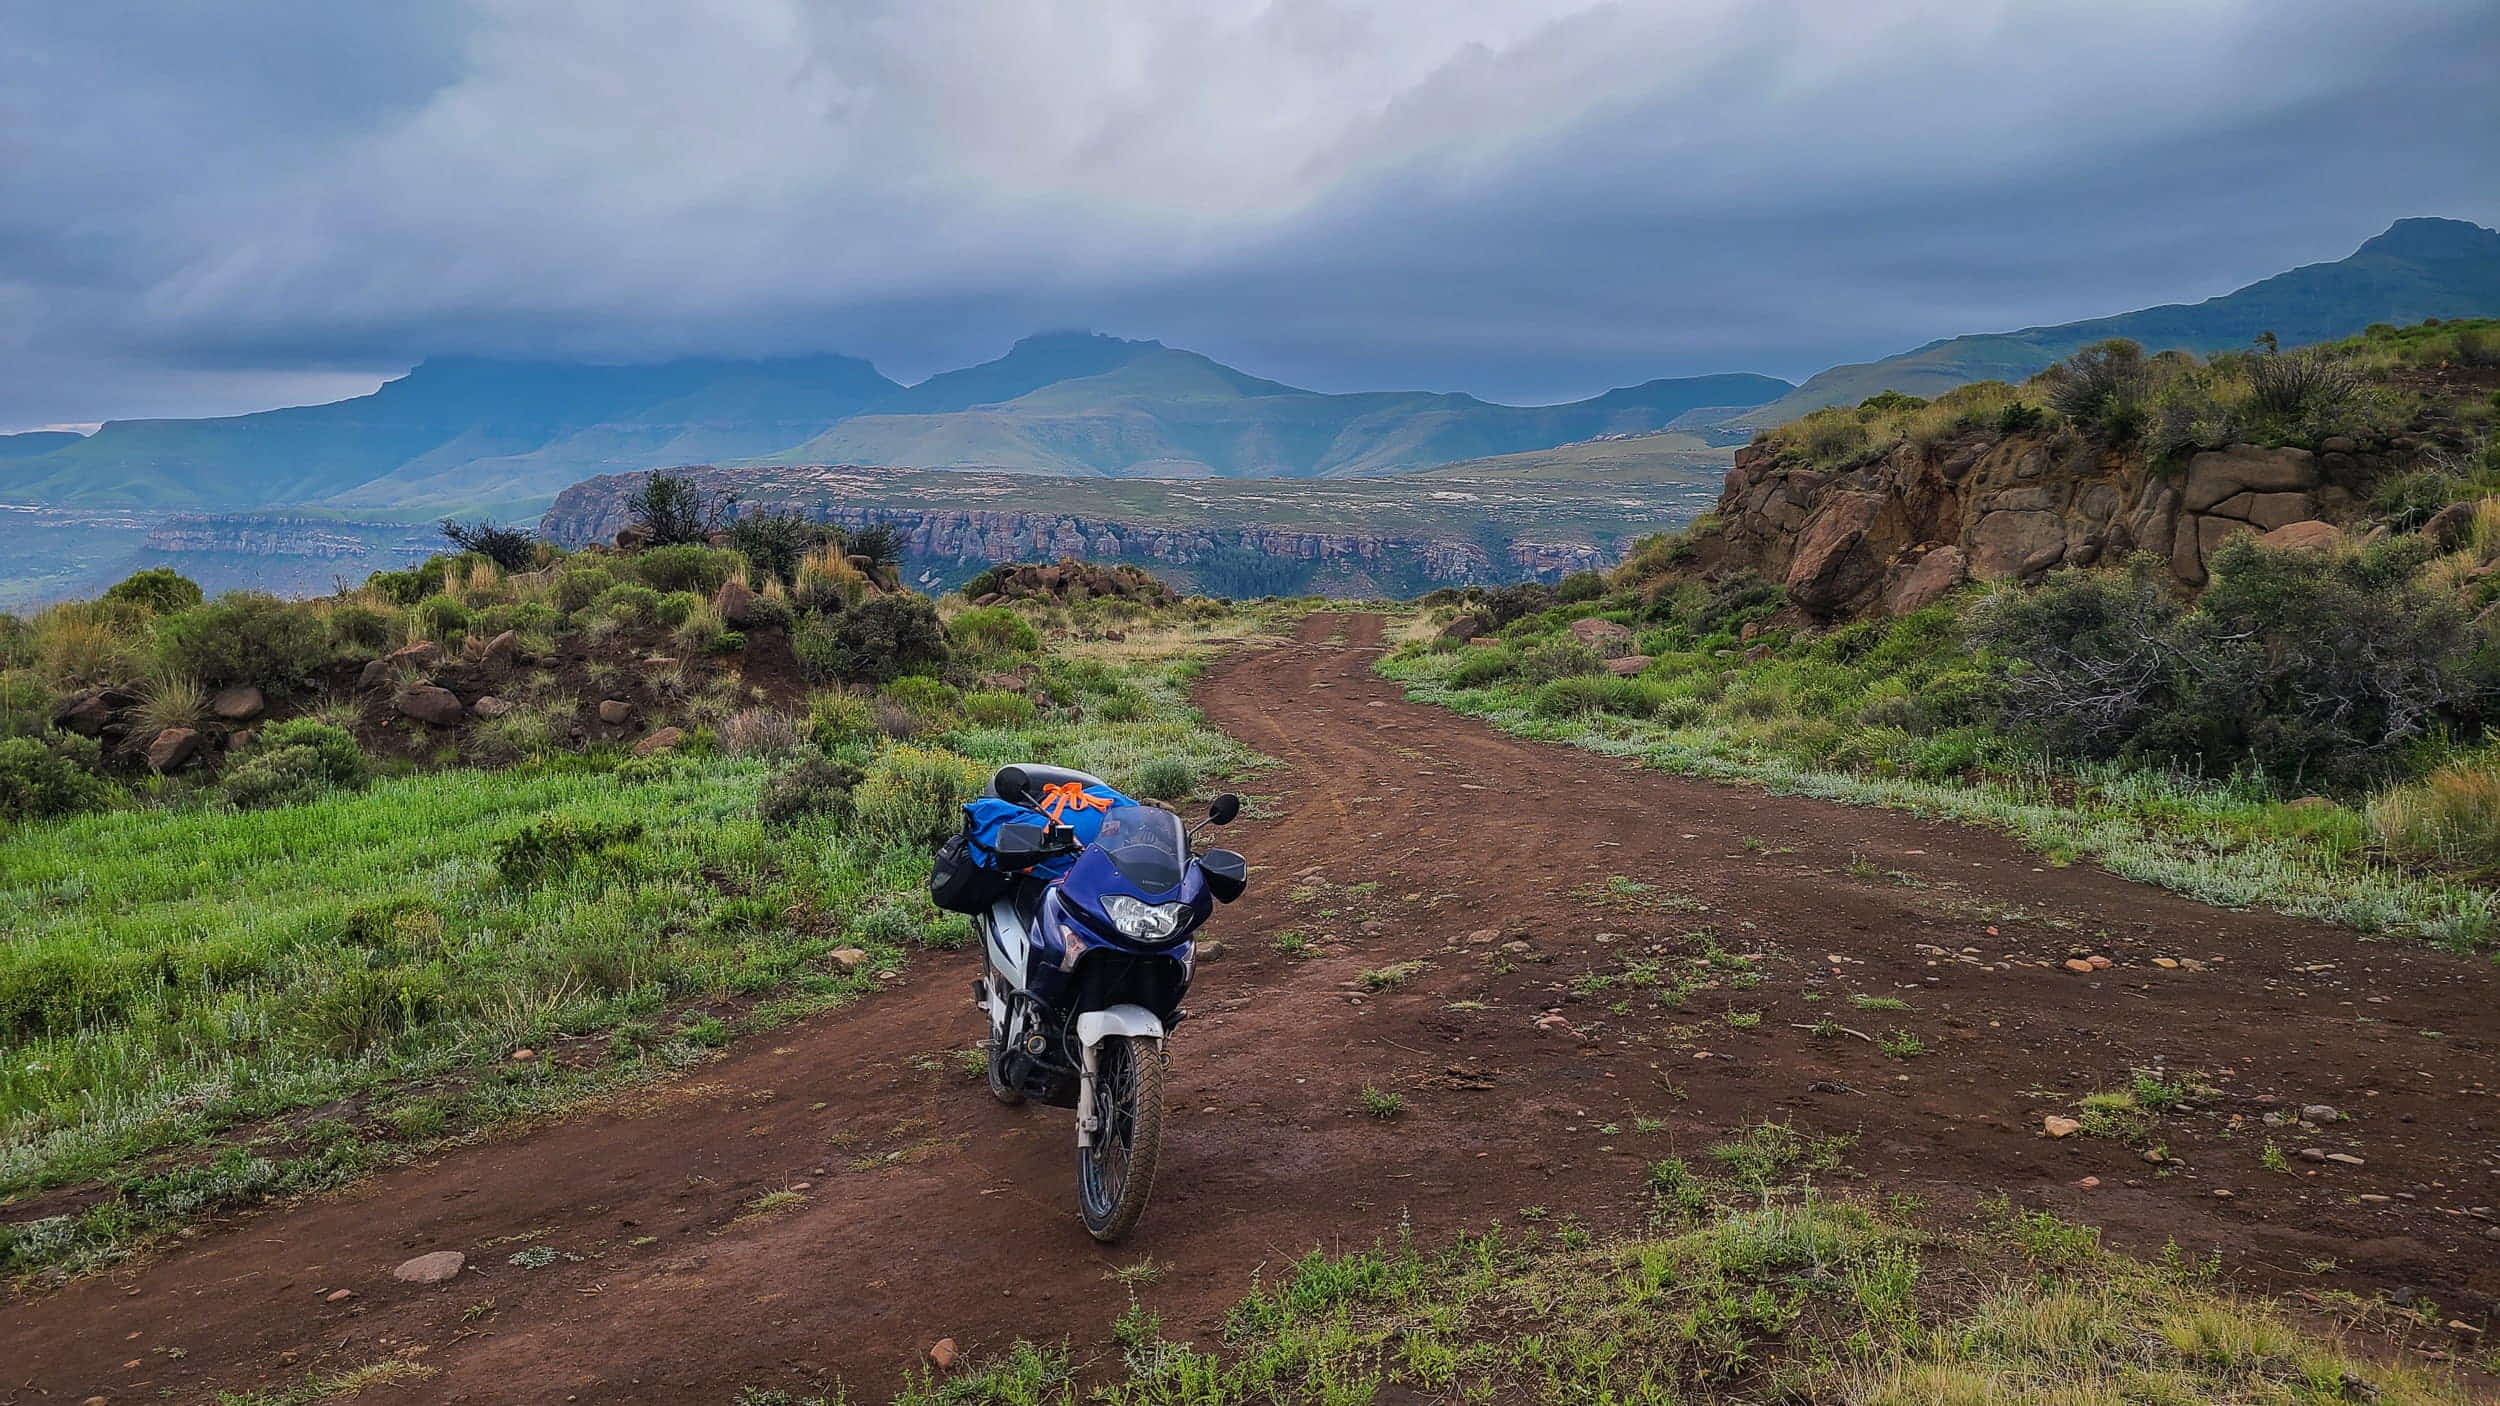 motorcycle on a dirt road with mountains shrouded in clouds behind